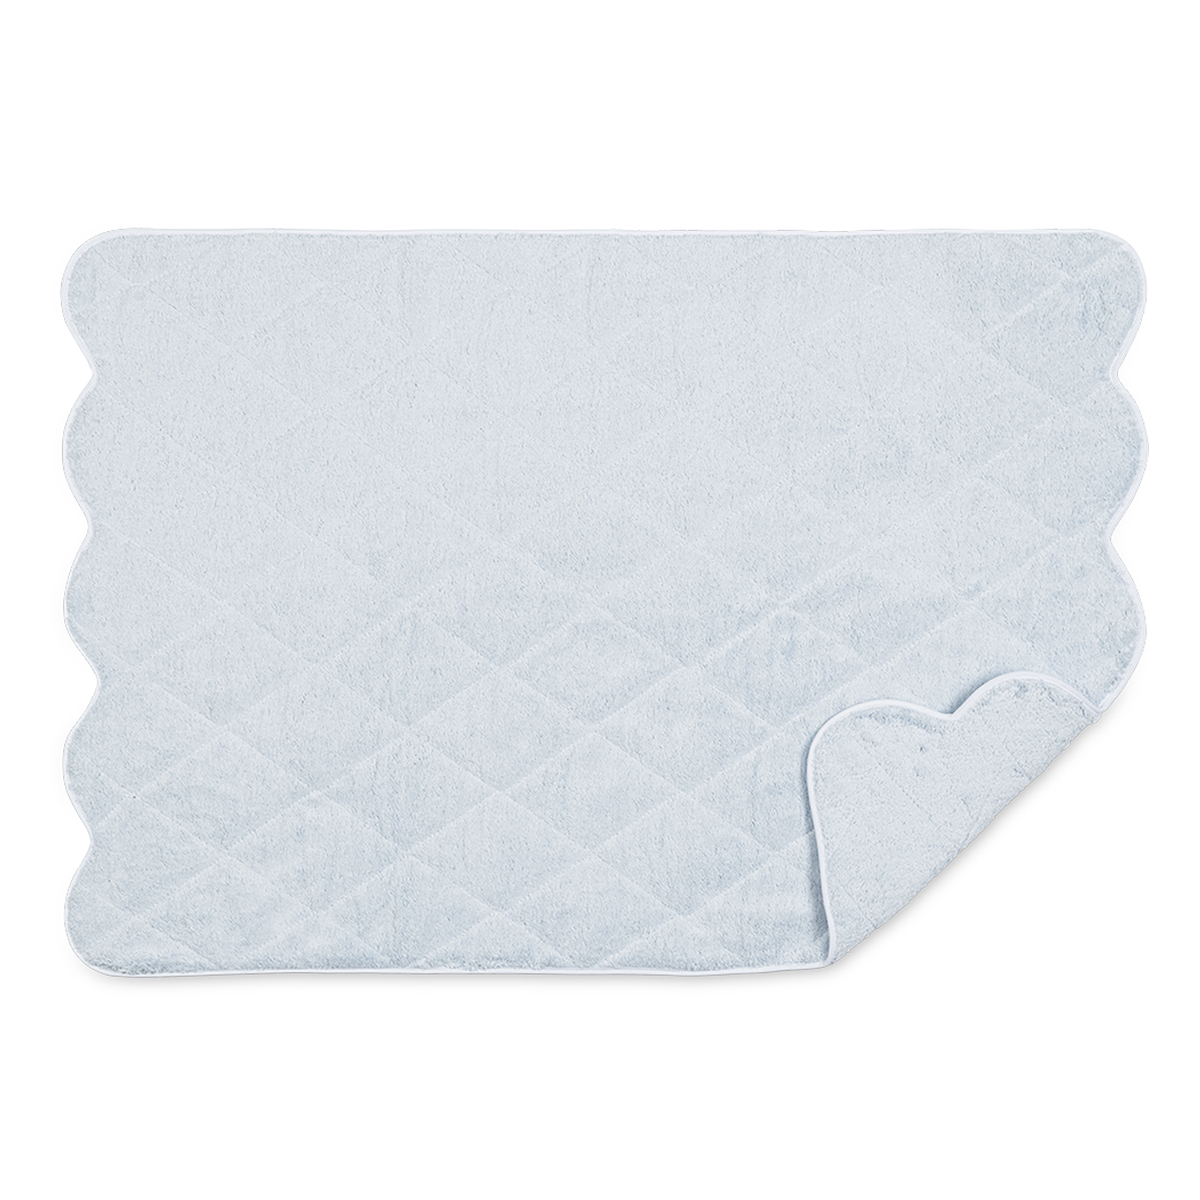 Quilted Tub Mat of Matouk Cairo Scallop in Color Light Blue/White